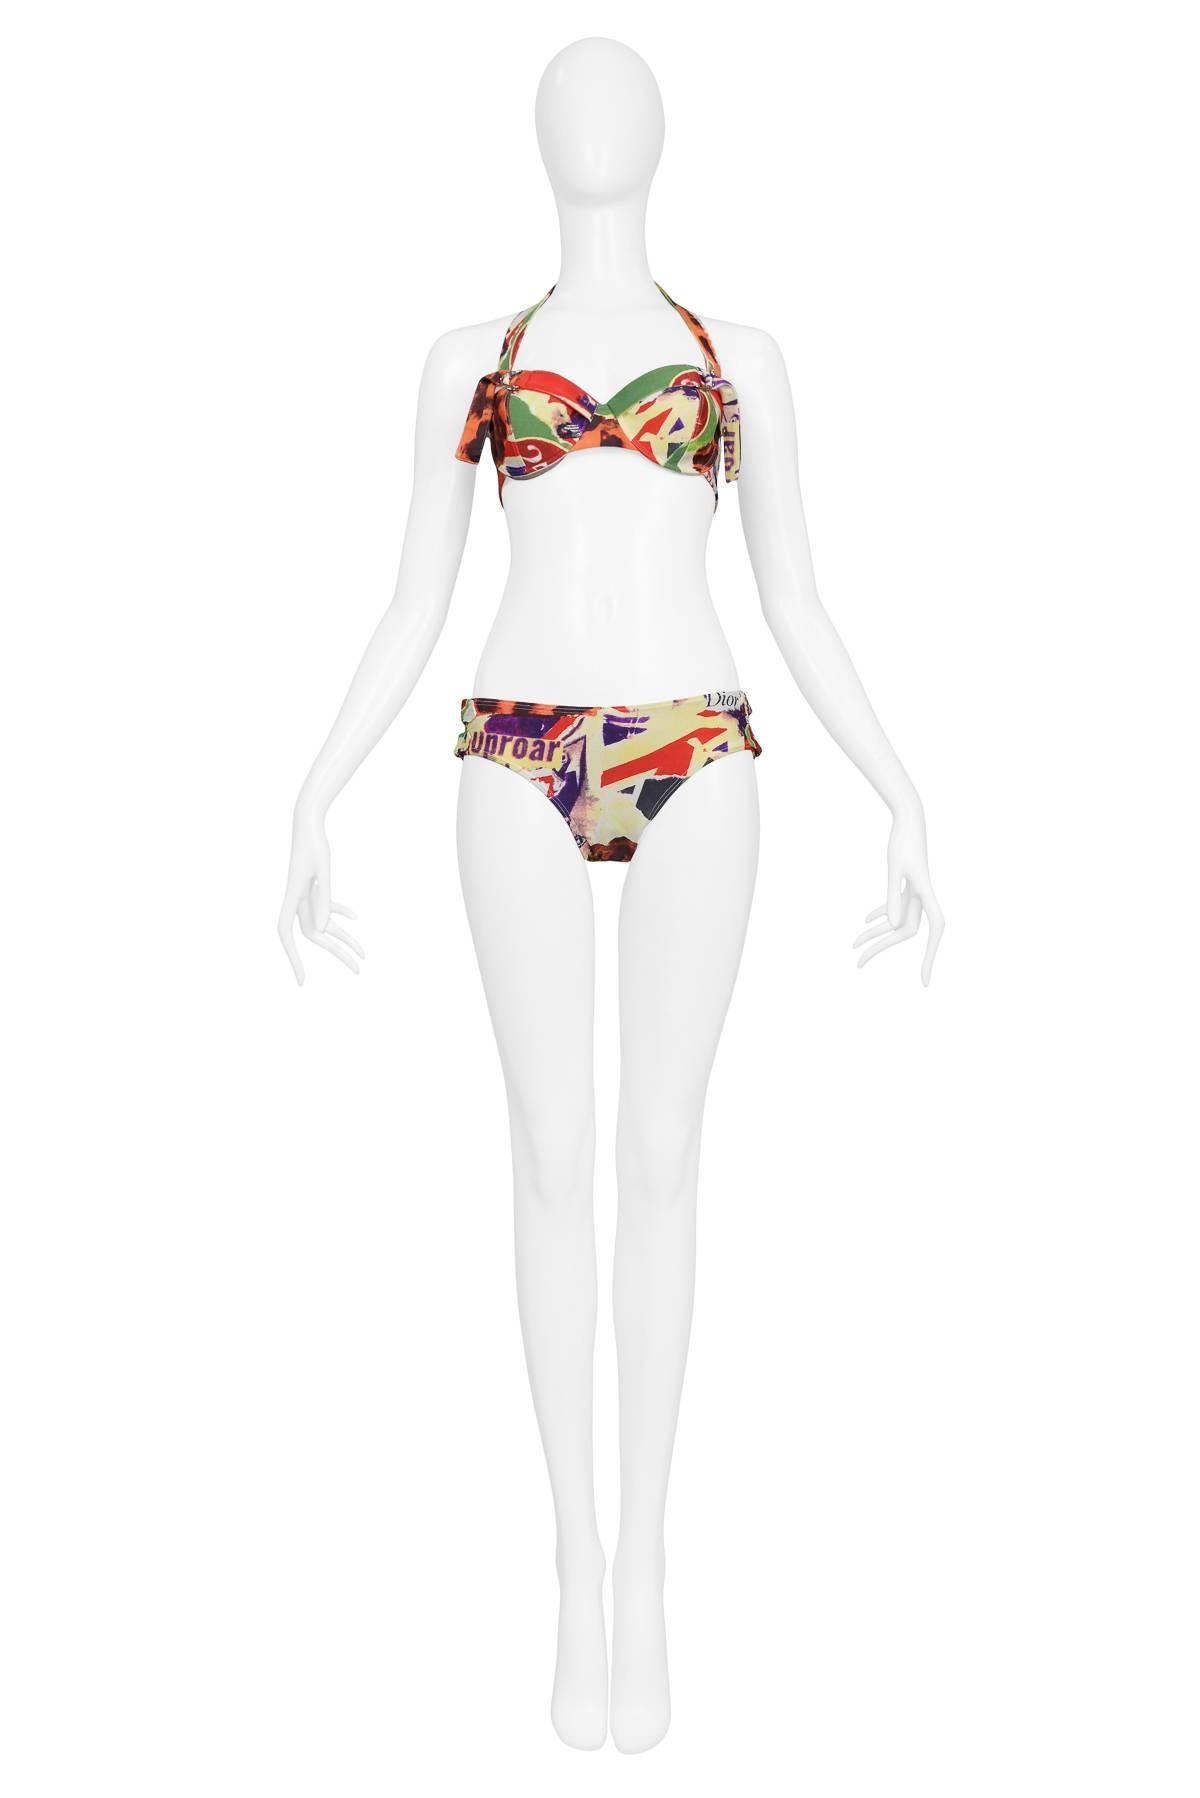 John Galliano for Christian Dior 'Victim' print bikini with buckle detail. Never worn. Collection Spring / Summer 2003.

This piece has never been worn and has all of its original tags. 

Size: French 40 

